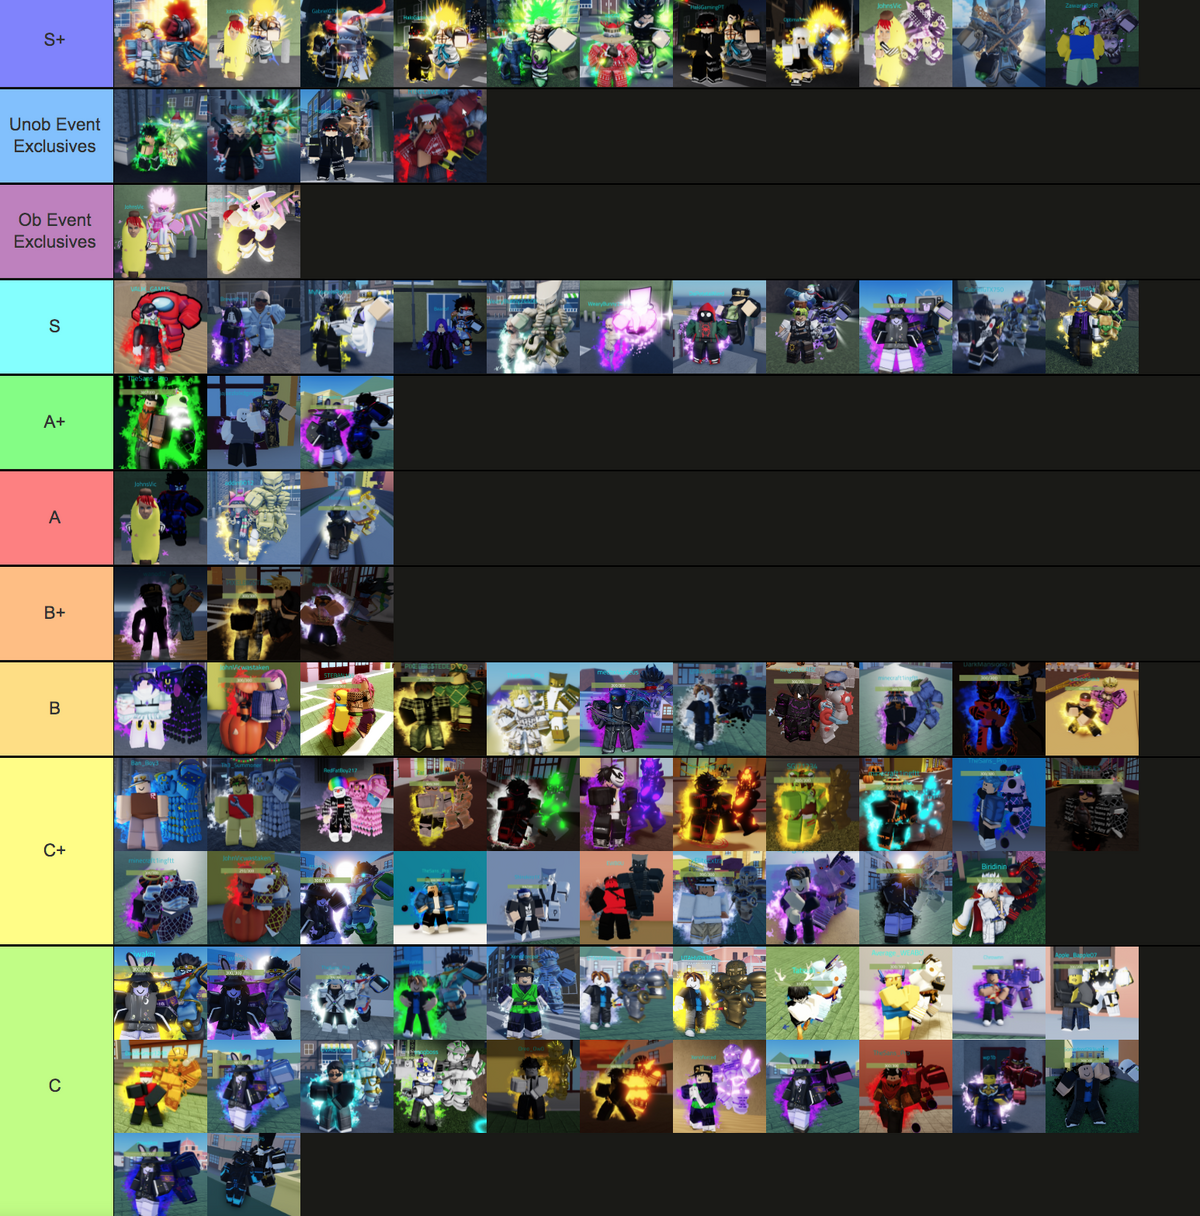 Terrible Jojo tier list by their reaction to dying in Fortnite (Part 1-5), /r/ShitPostCrusaders/, JoJo's Bizarre Adventure